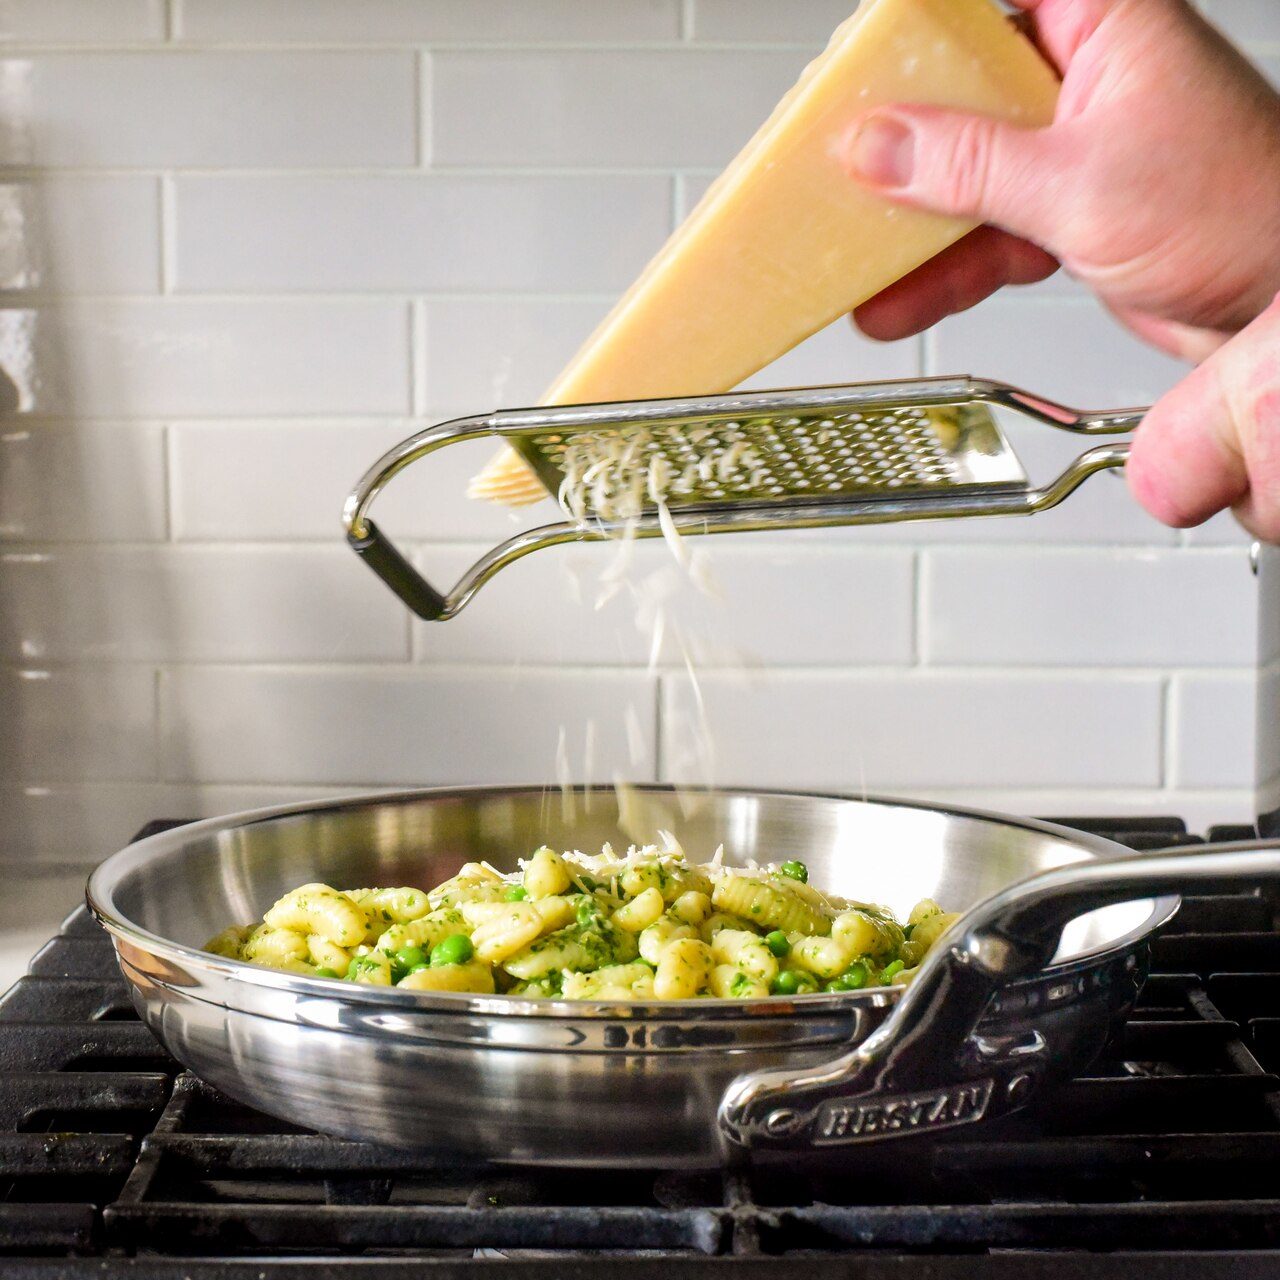 Professional Clad Stainless Steel Sauté Pans – Hestan Culinary